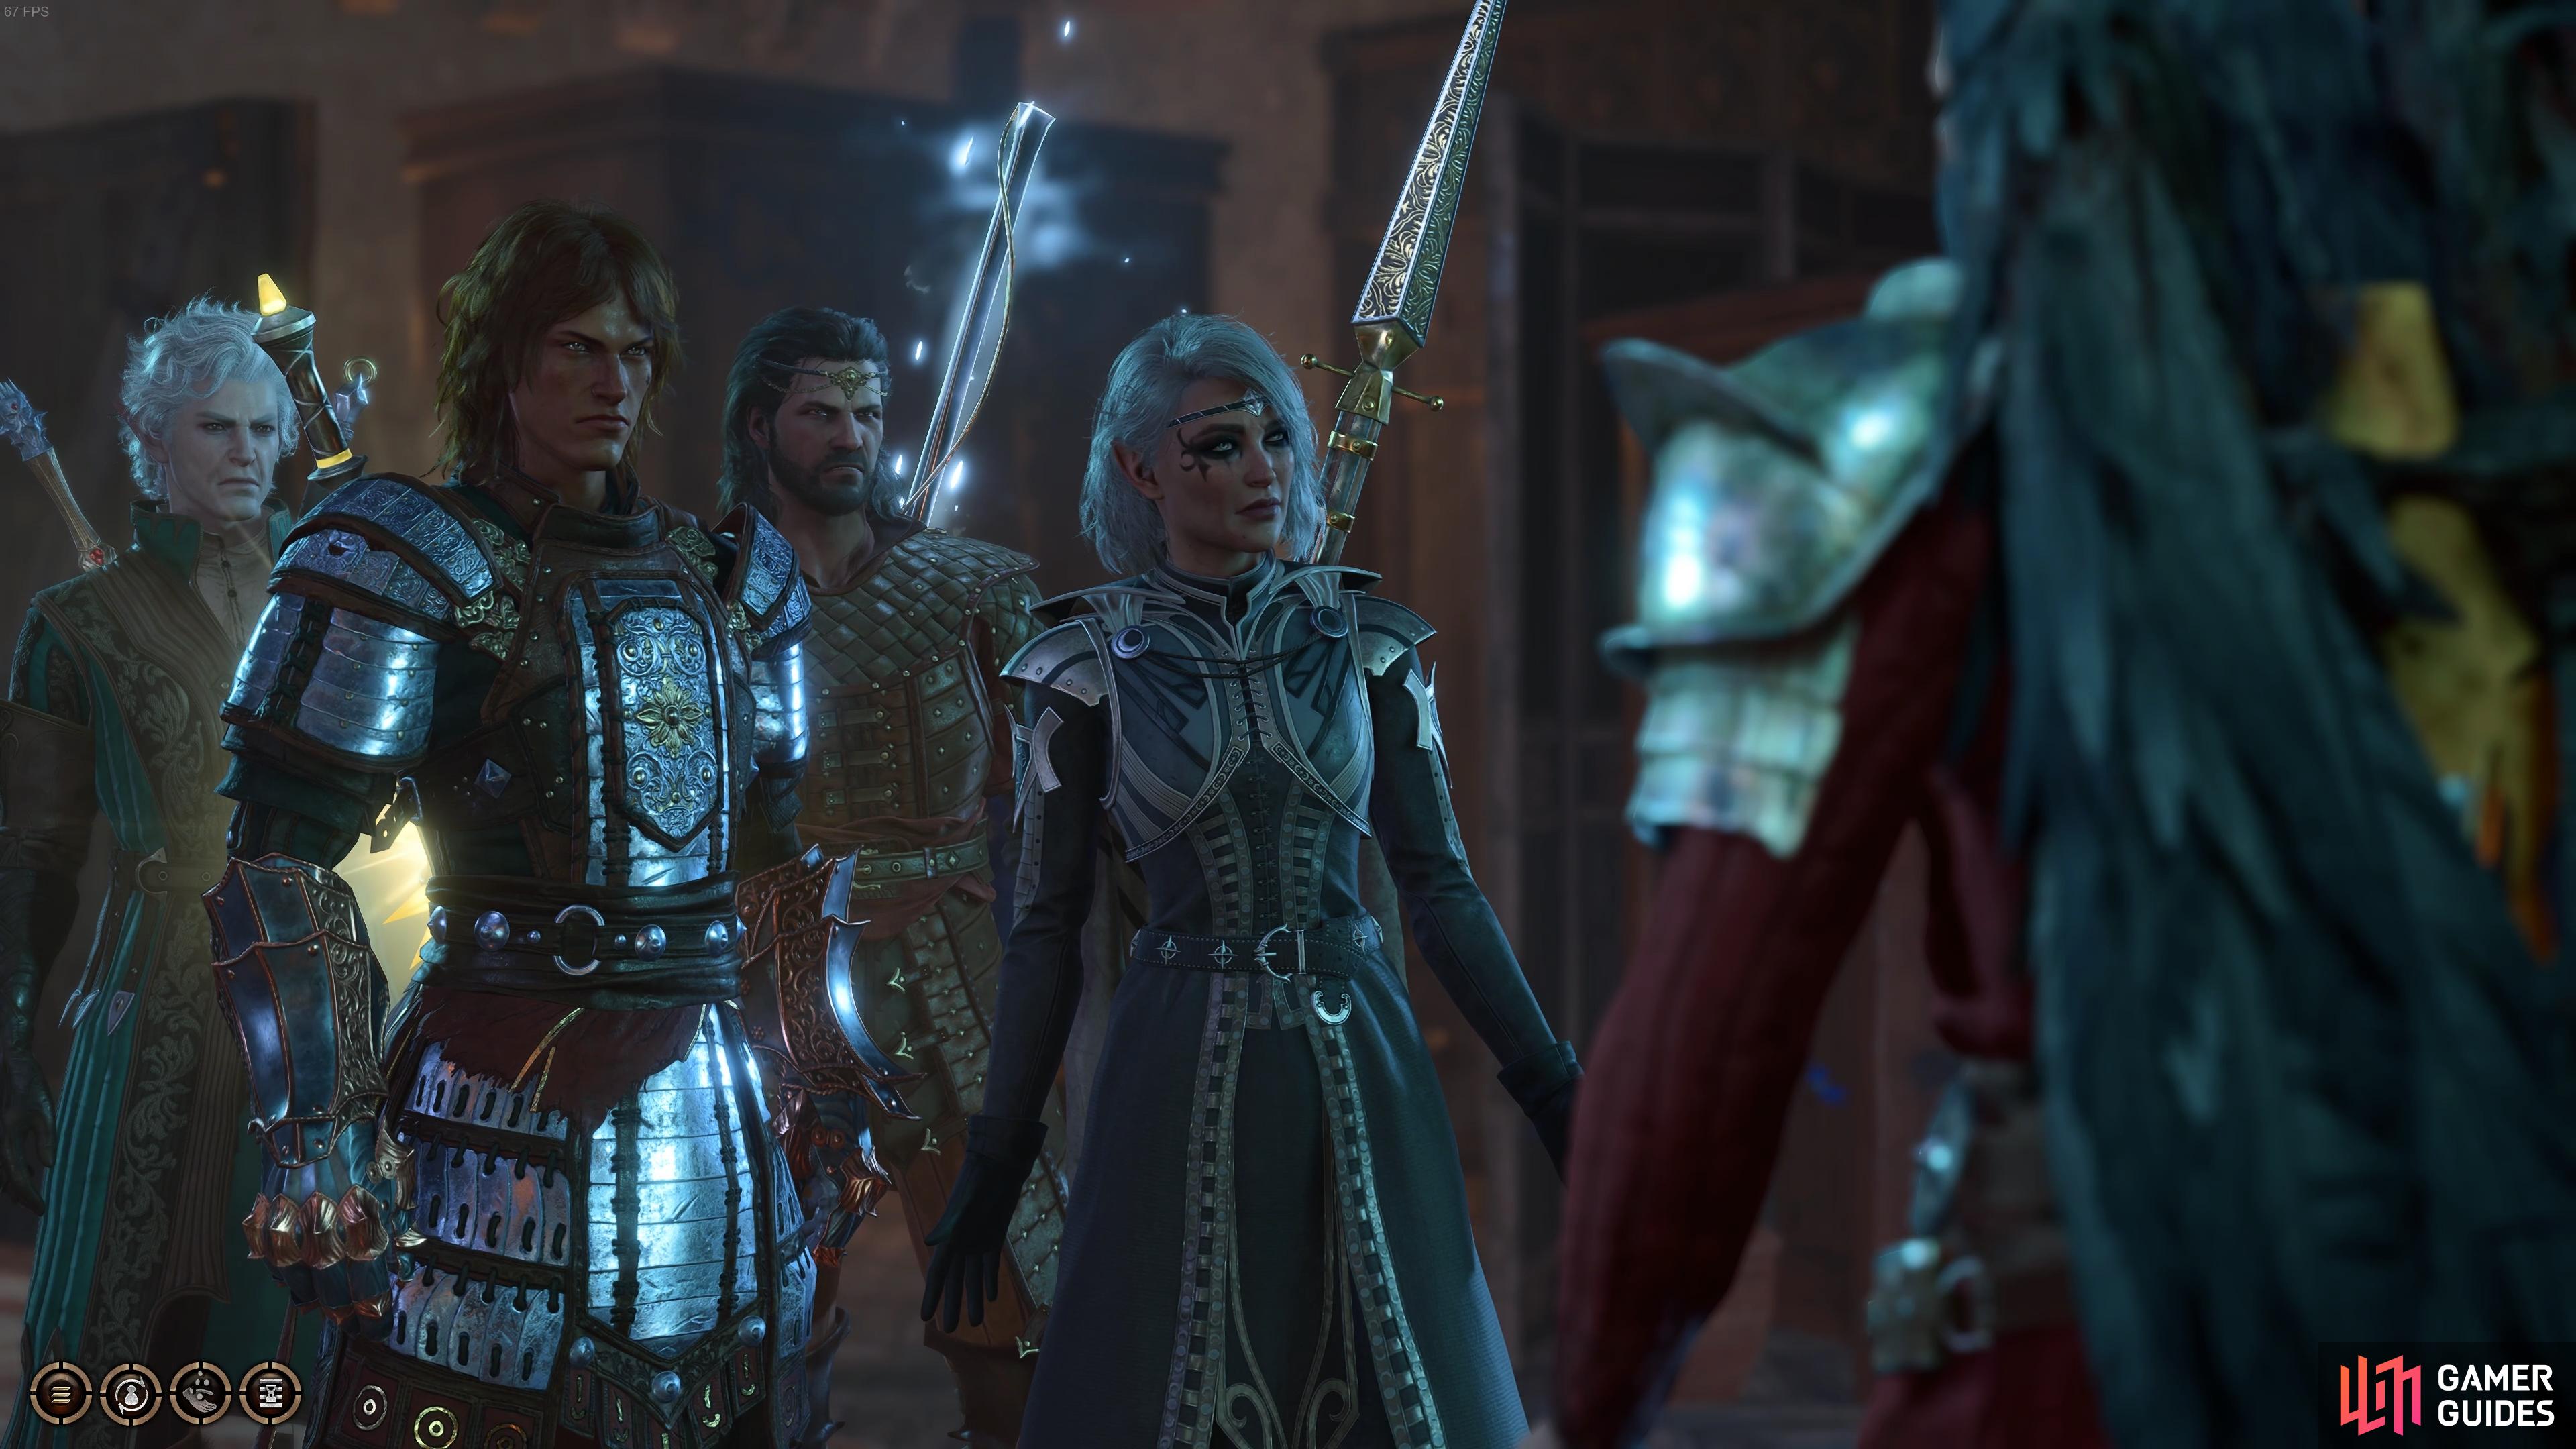 The gang looking a bit miffed at Flaming Fist Marcus’ appearance, Baldur’s Gate 3.